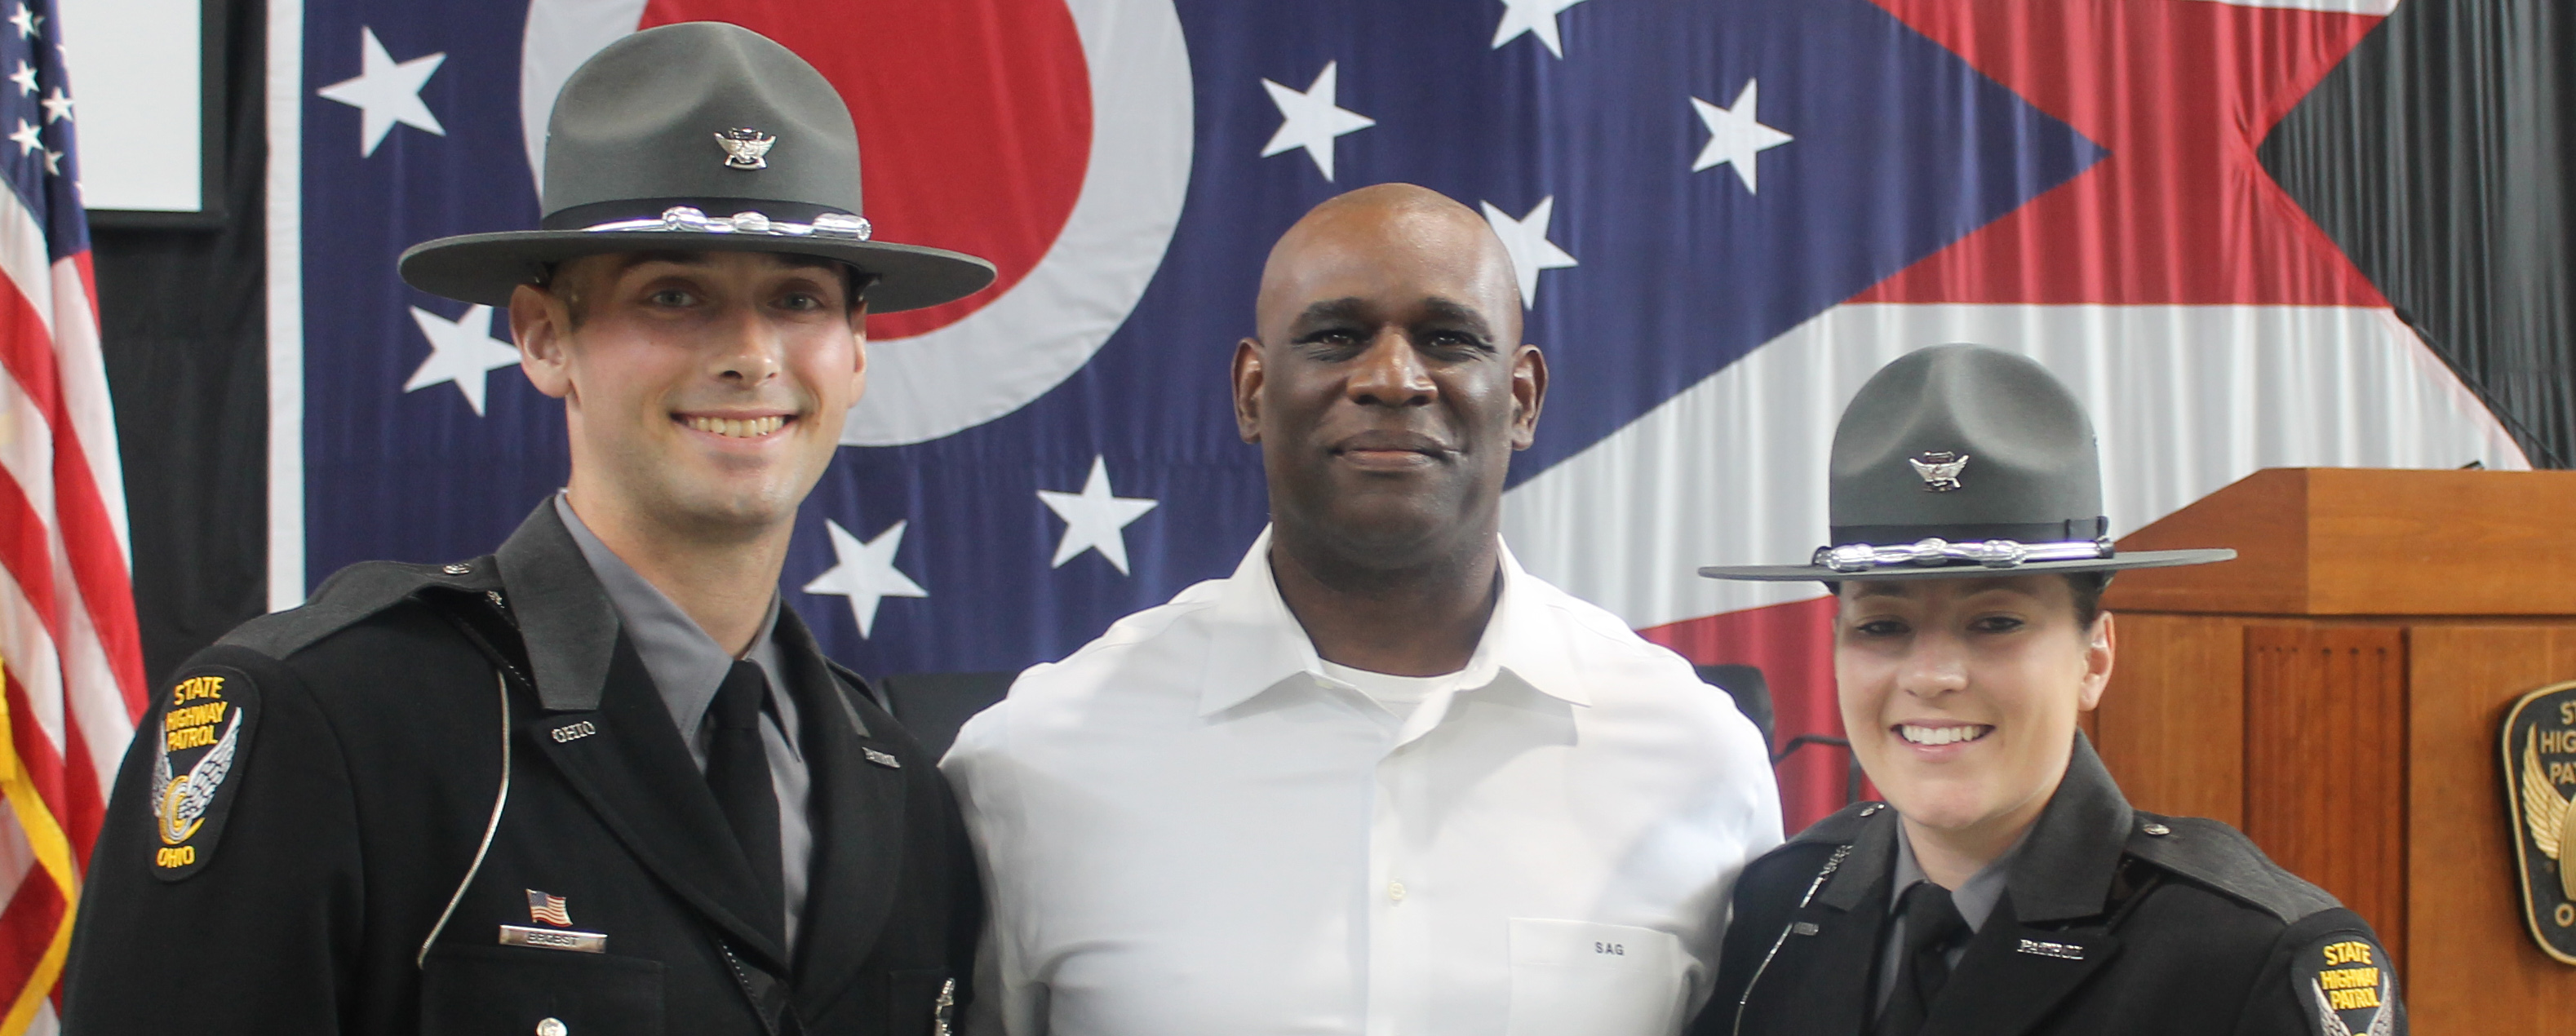 Professor Goodrum standing with two program graduates in full State Highway Patrol uniform and smiling at the camera